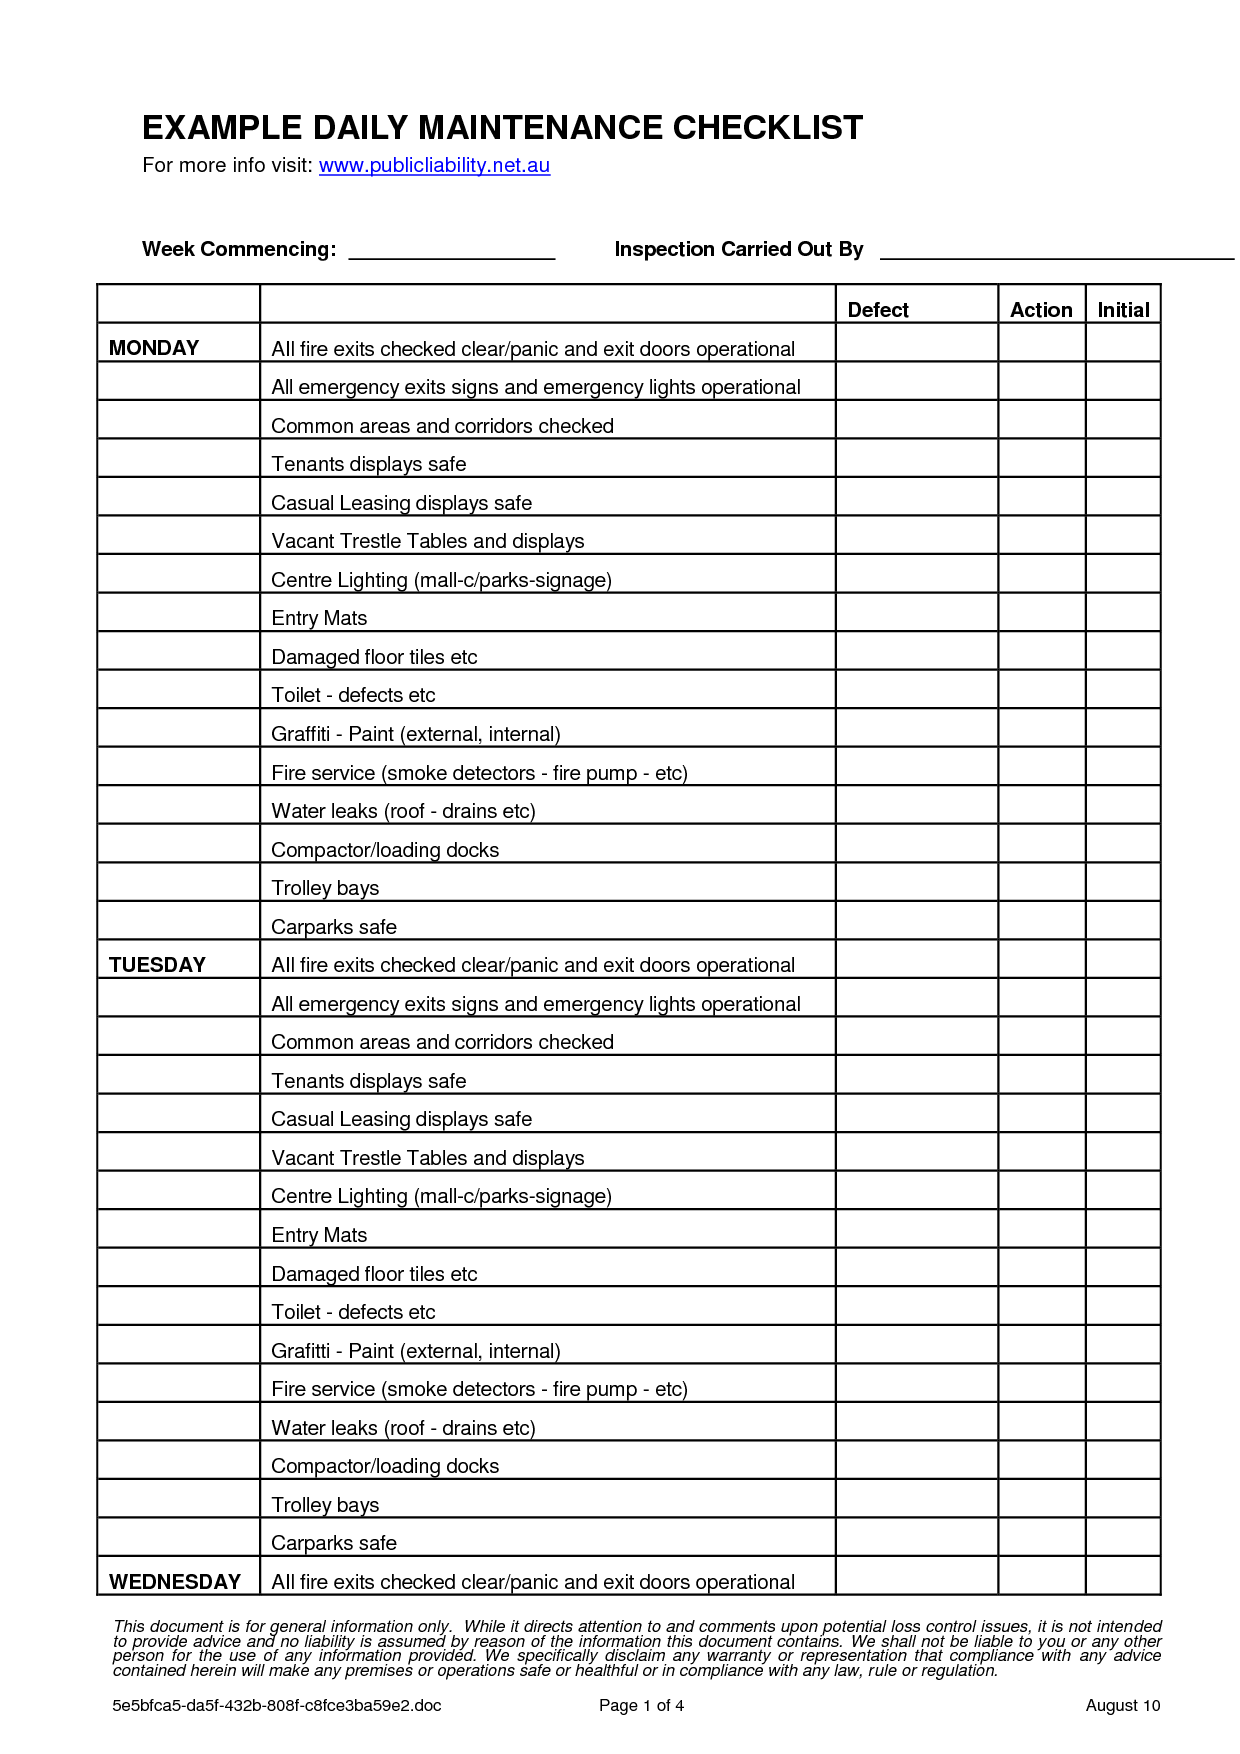 Vehicle Maintenance Schedule Templates 9+ Free Word, Excel, PDF 